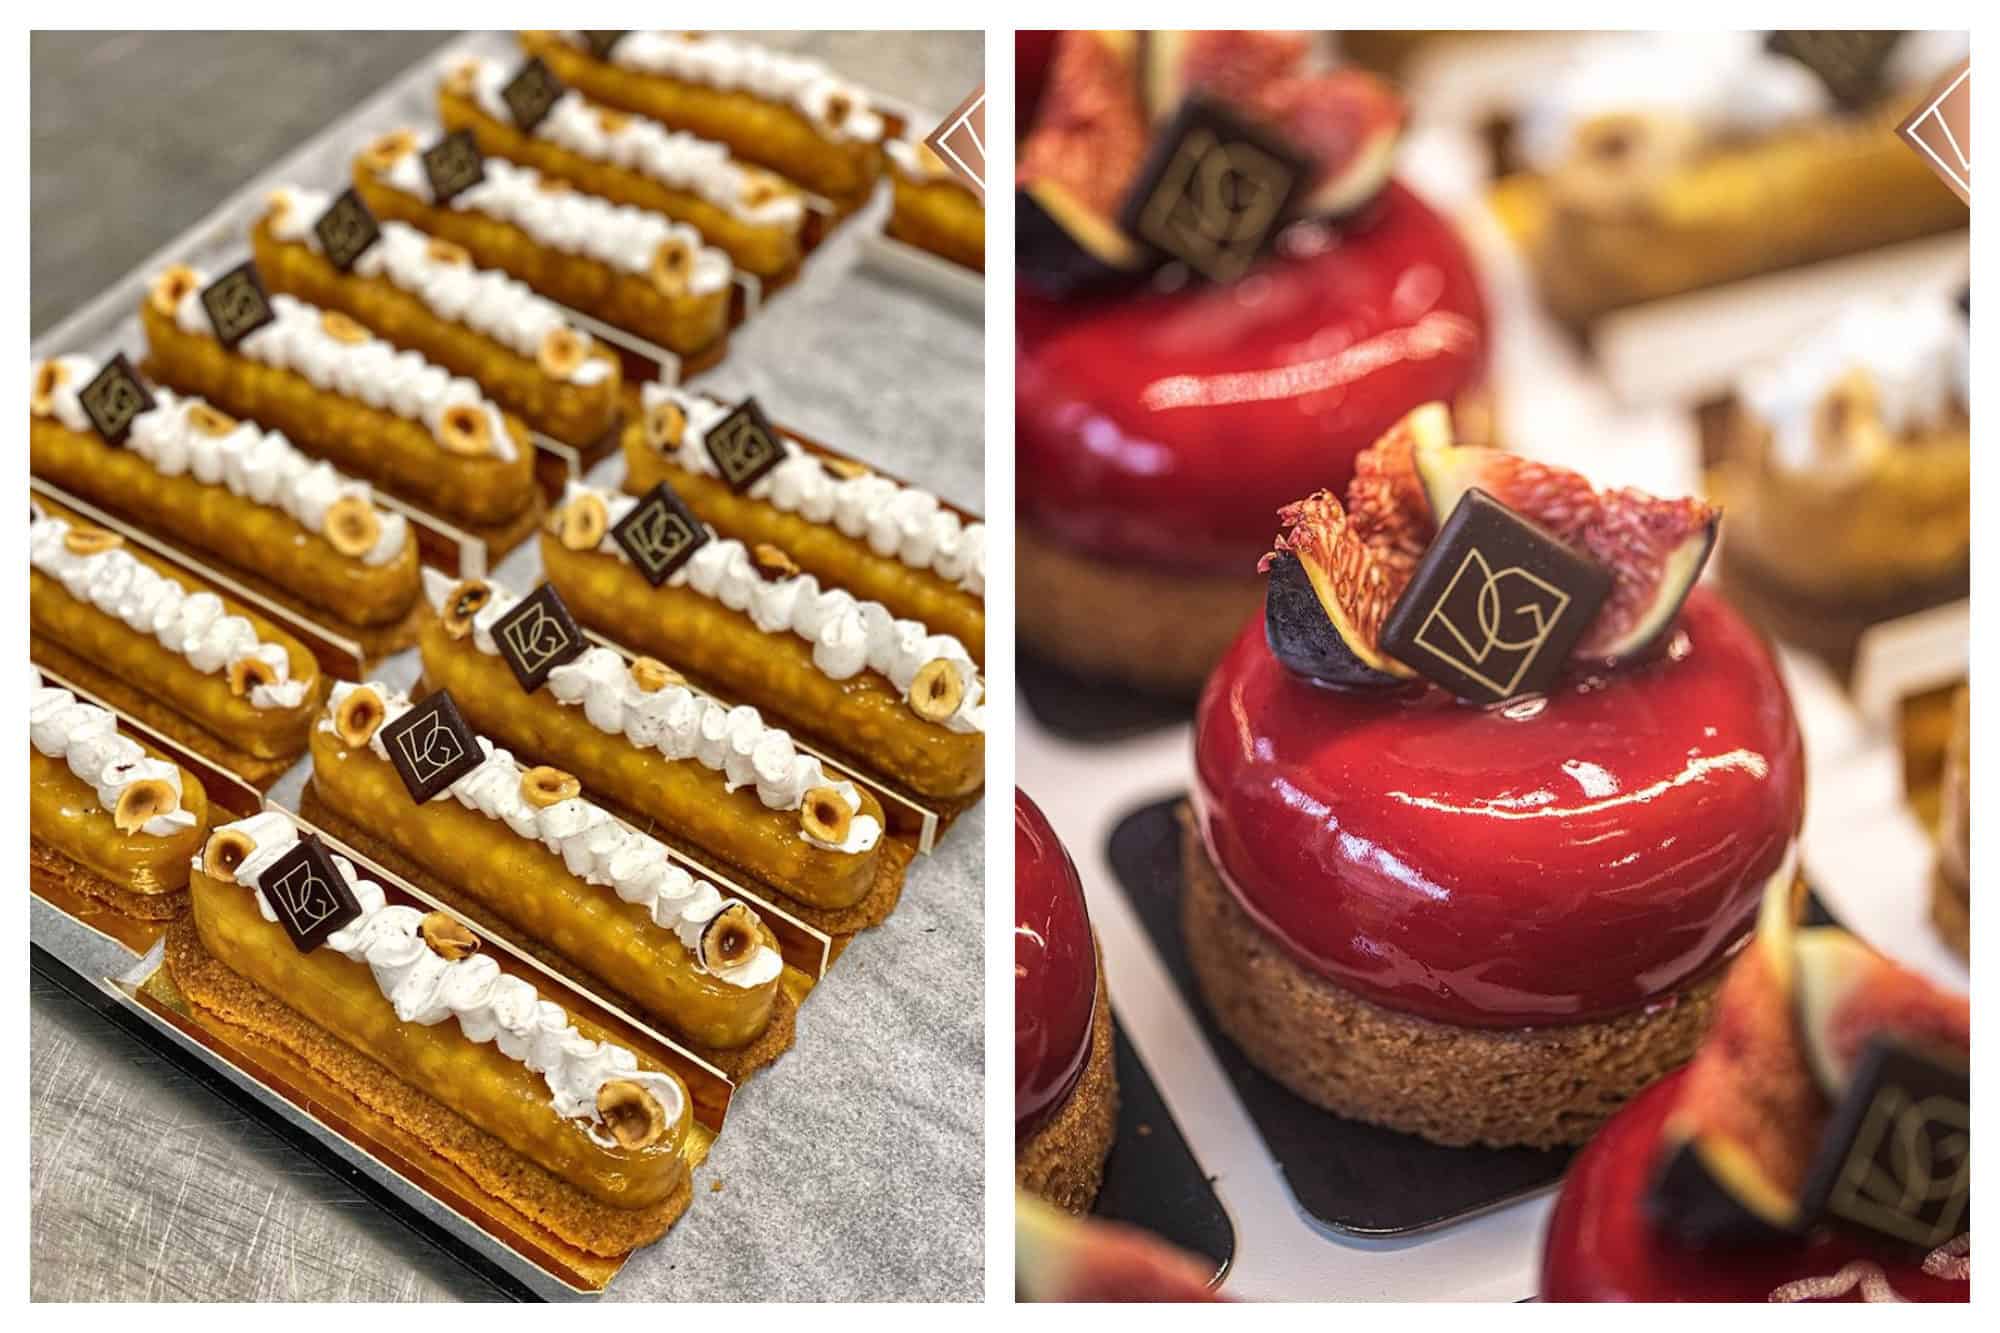 Vegan and gluten-free eclairs with whipped cream (left) and fruity red-glaze fig desserts (right) lined up in rows under the counter of VG Patisserie in Paris.